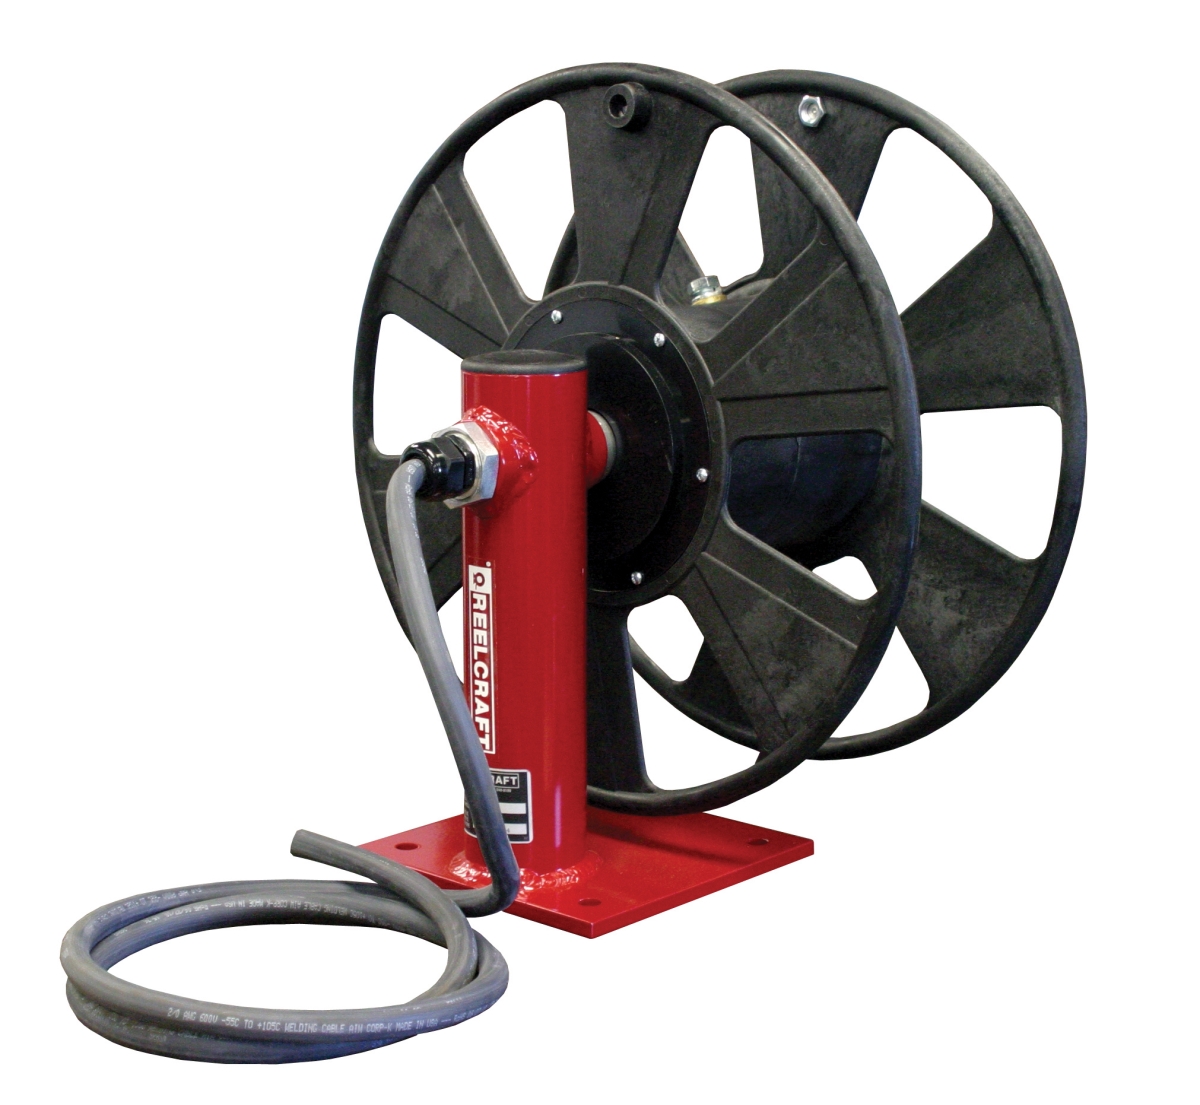 T-1460-0 No.1 & 2 X 150-200 Ft. 250 Amp Arc Weld Without Cable Reel, Red & Black